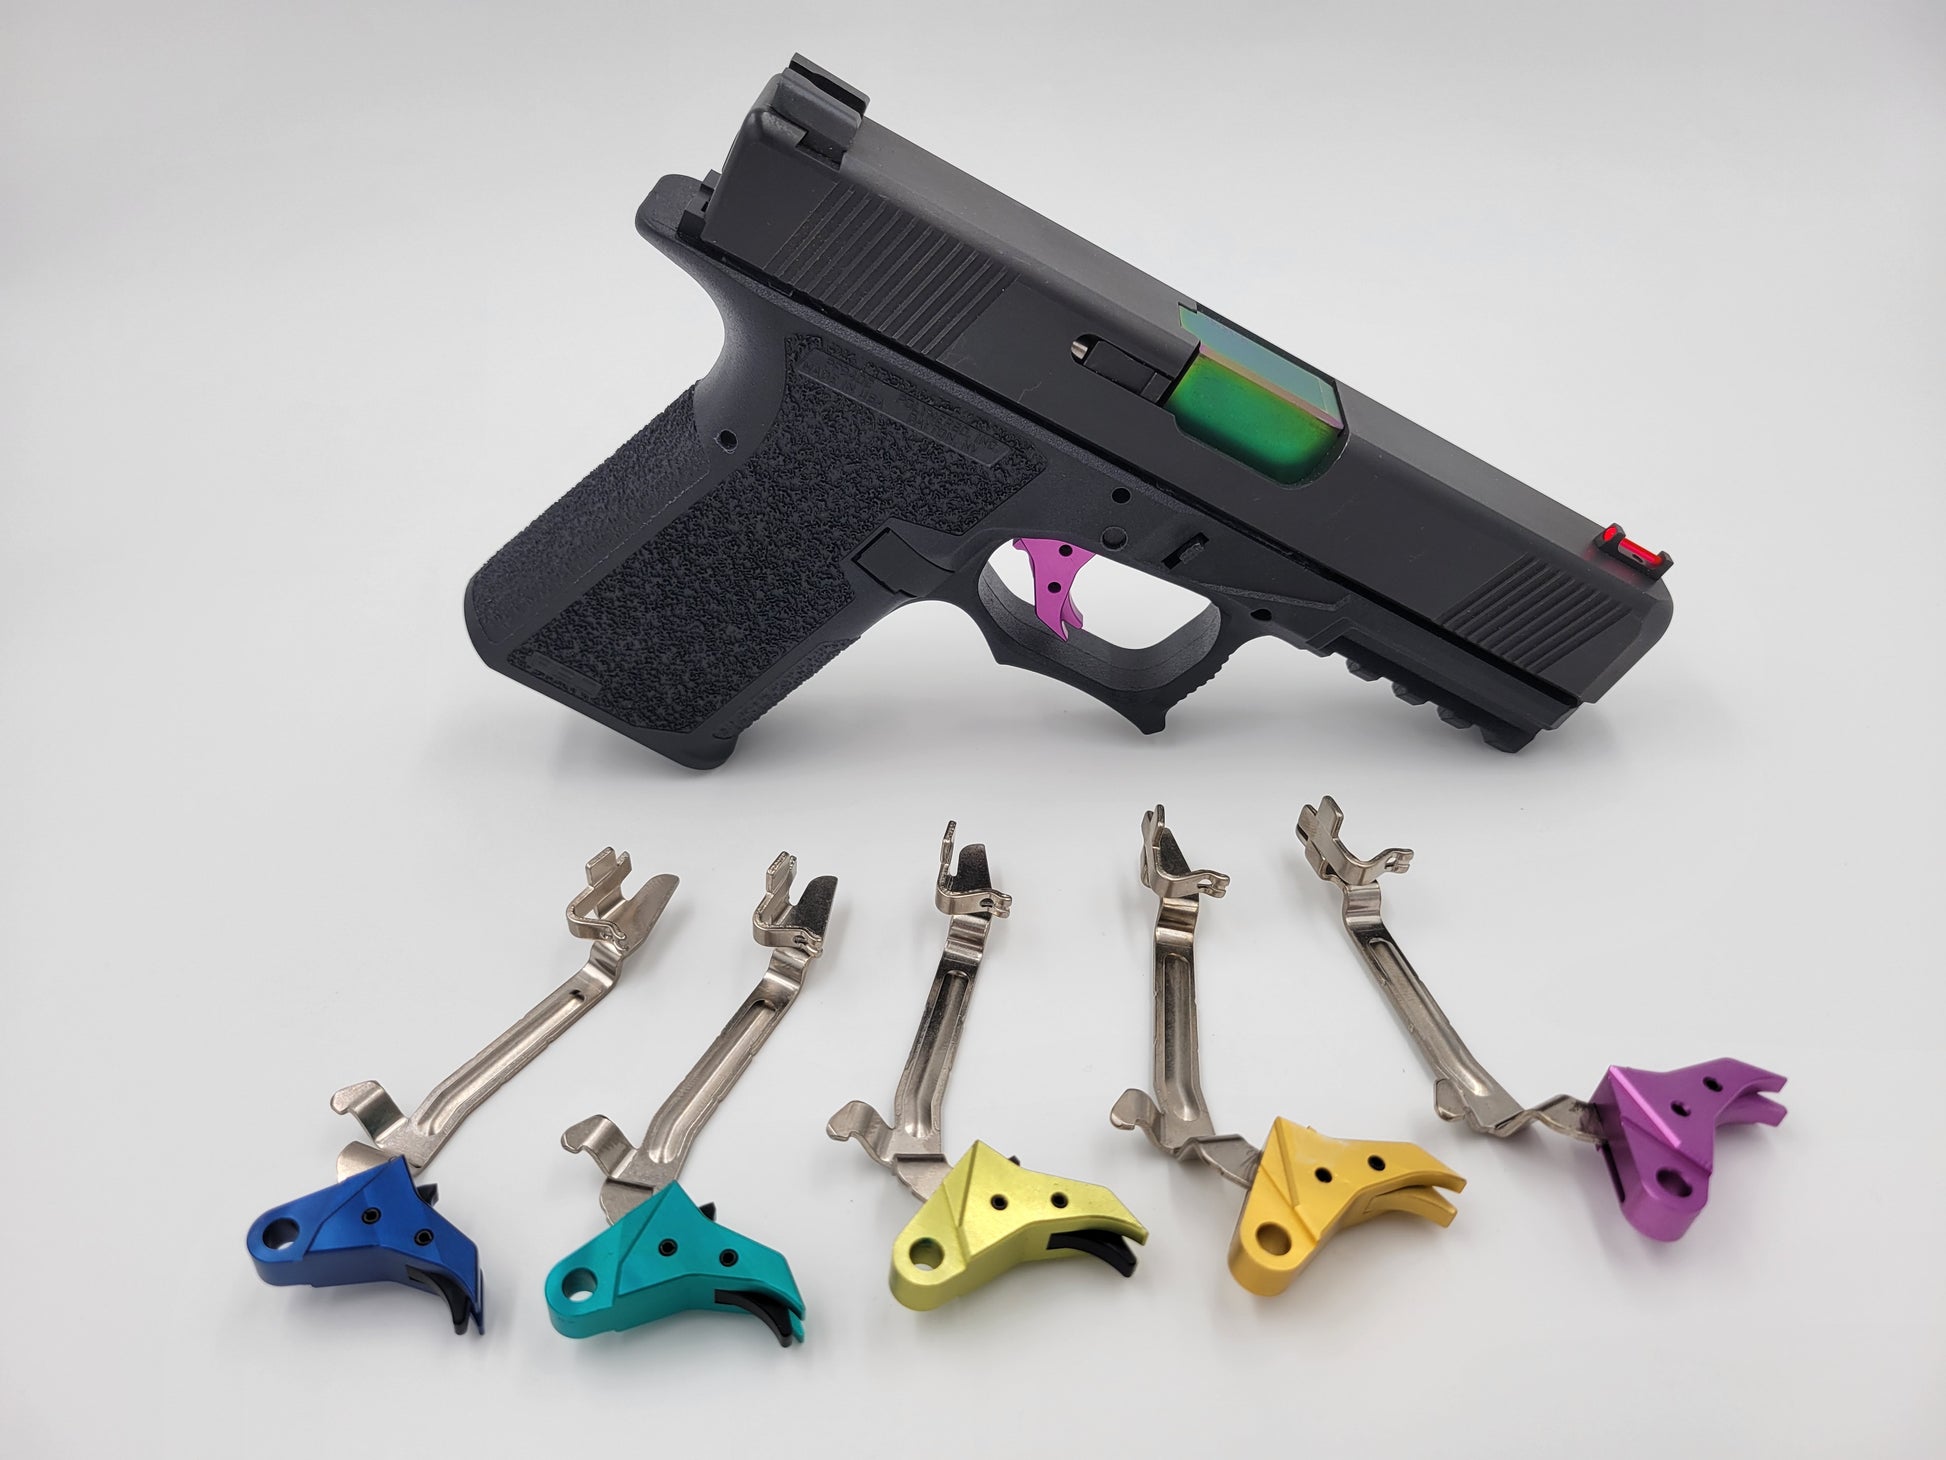 G19 Triggers with Bright Colors